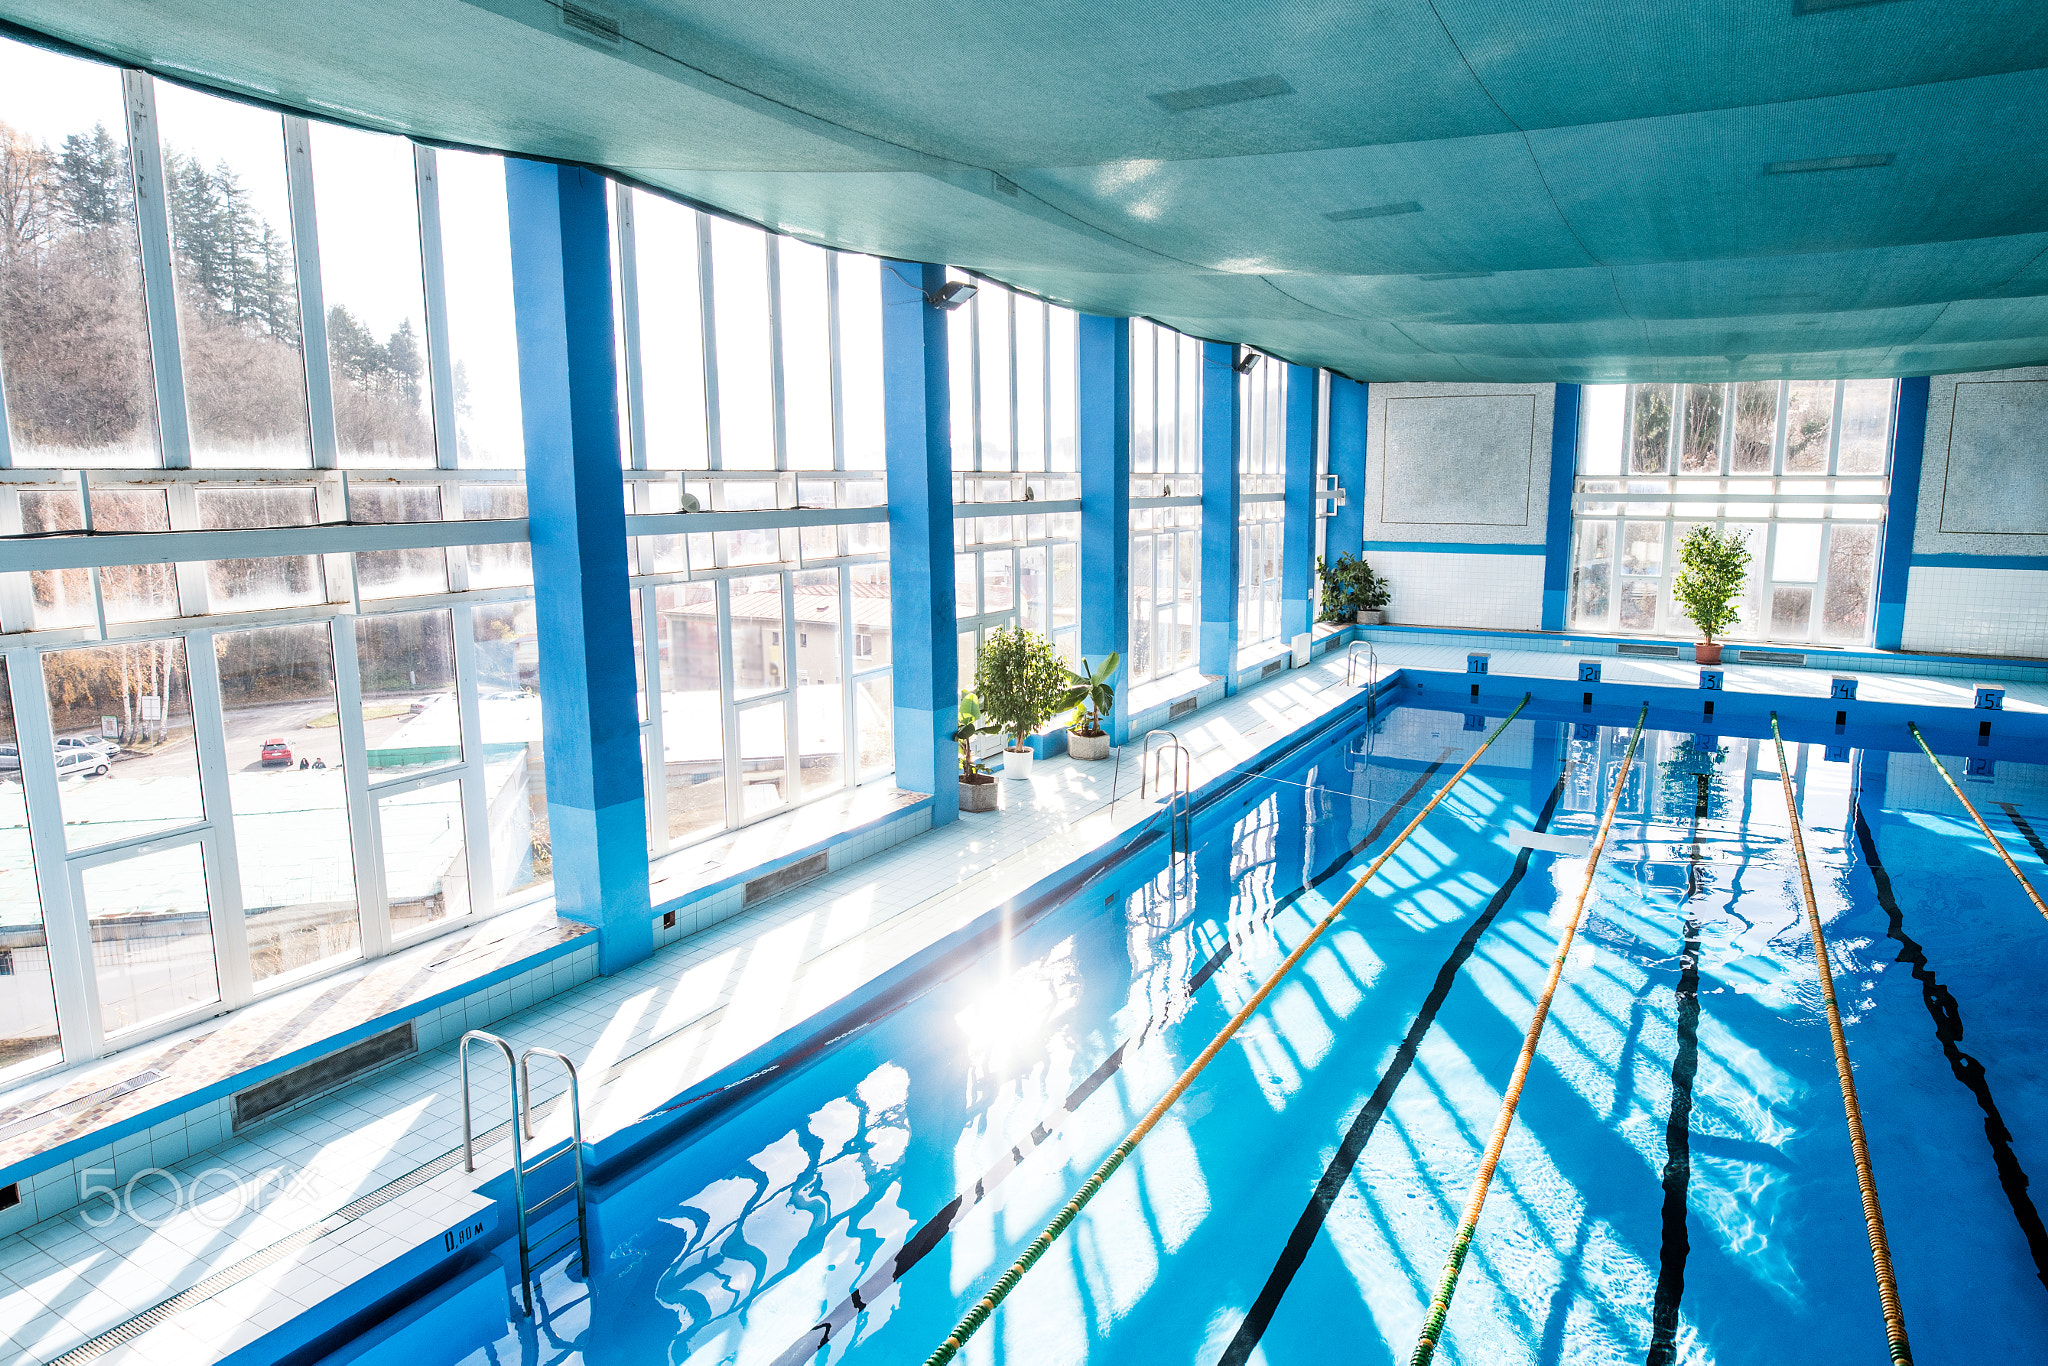 An interior of an indoor public swimming pool.